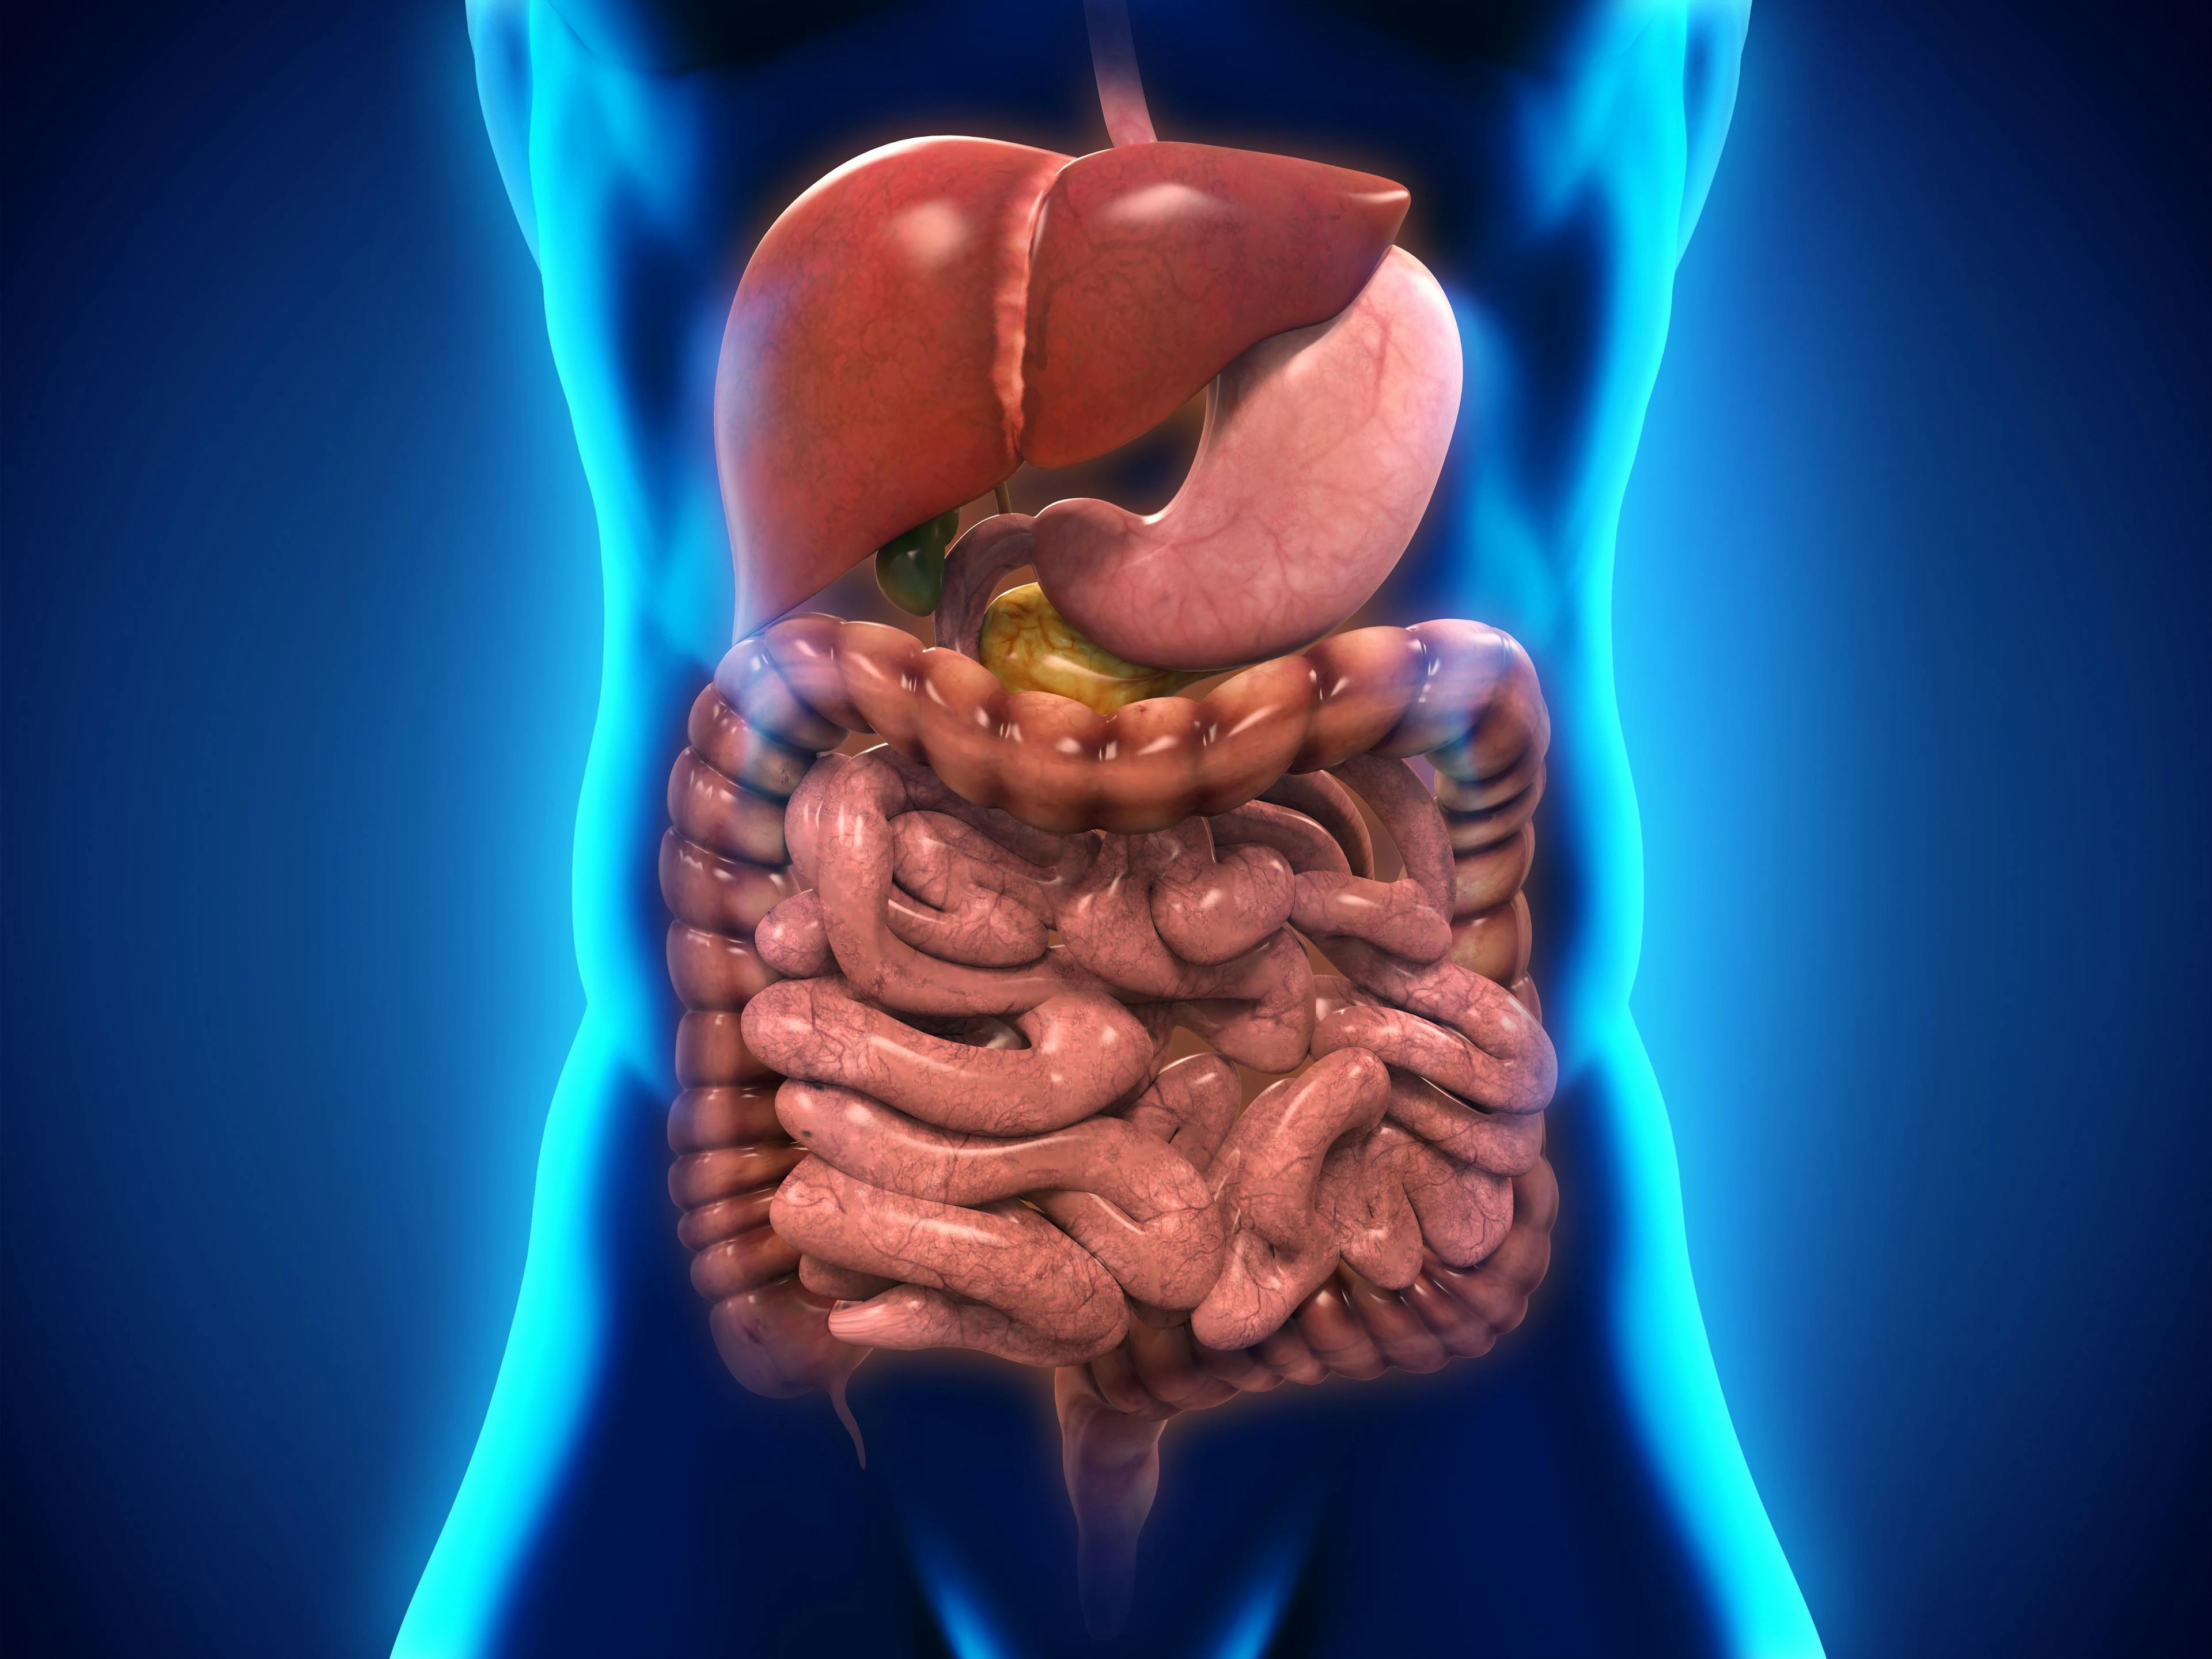 Trastuzumab Deruxtecan Reduces Risk of Death in HER2-Positive Advanced Gastric and GEJ Cancer